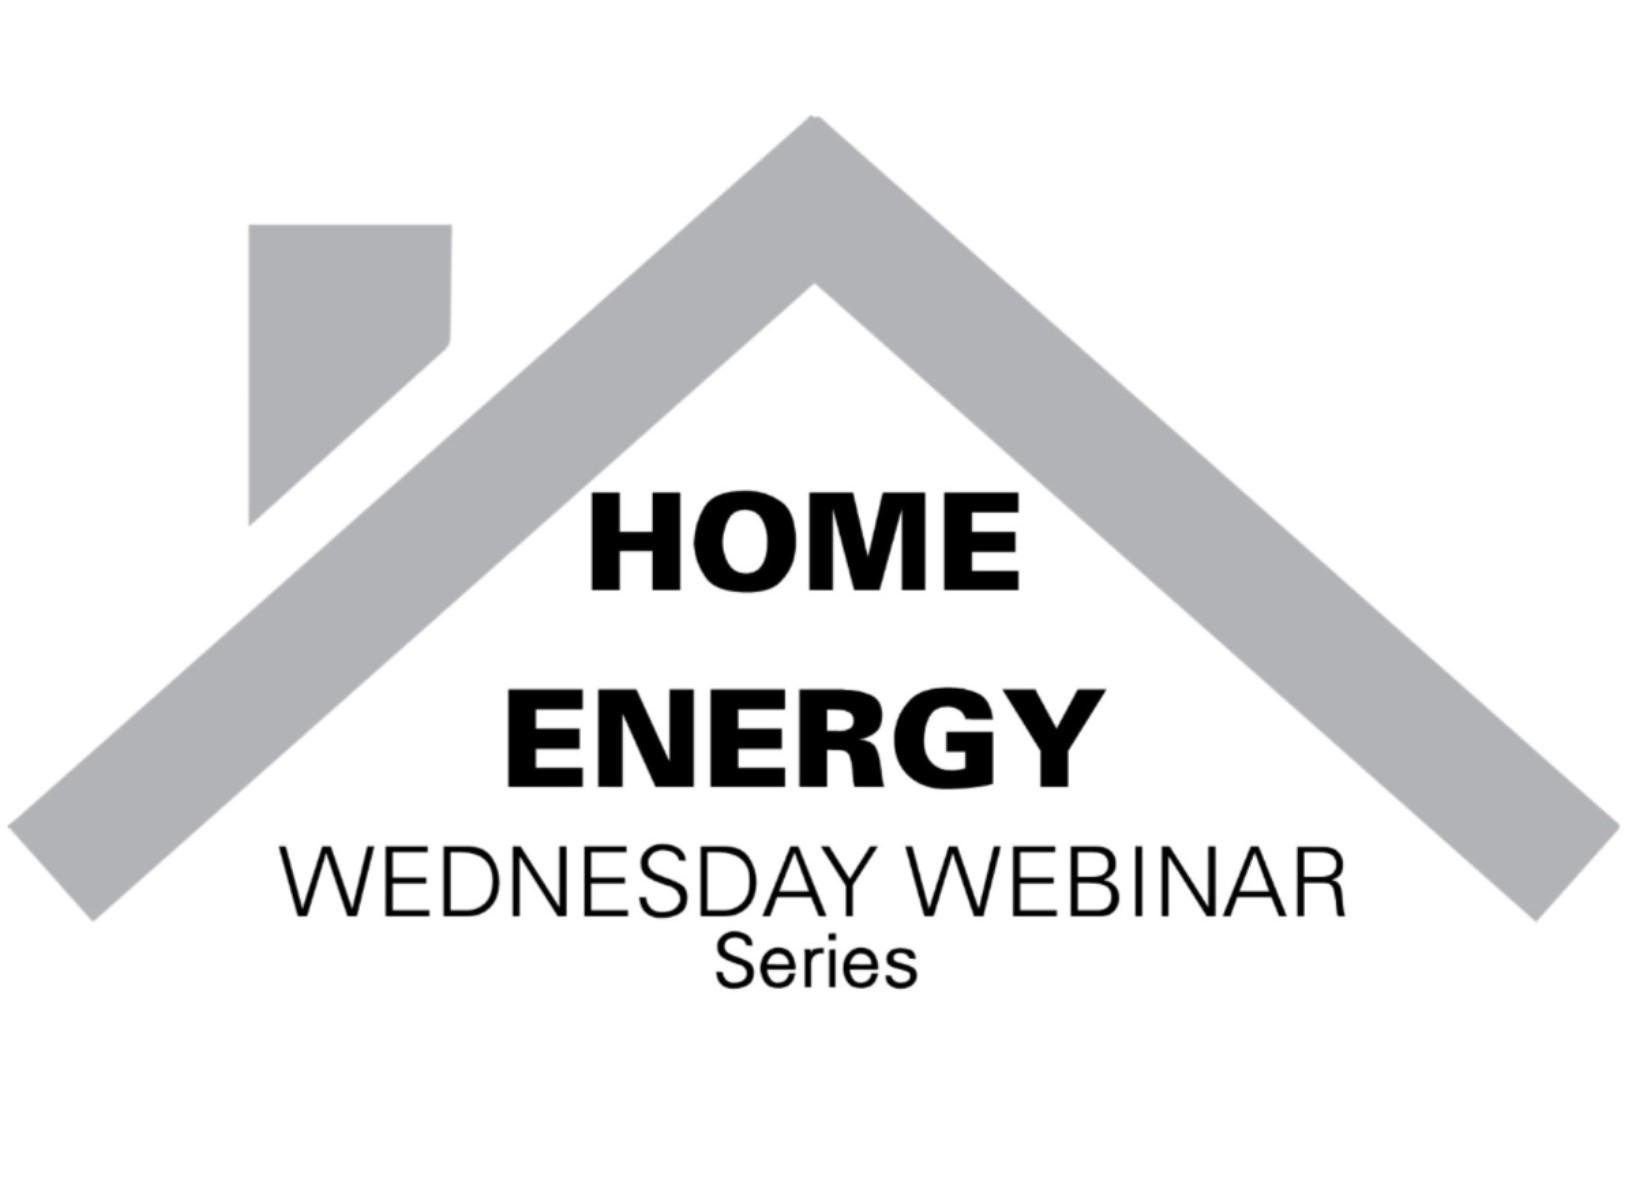 Roof with text Home Energy Wednesday Webinar Series